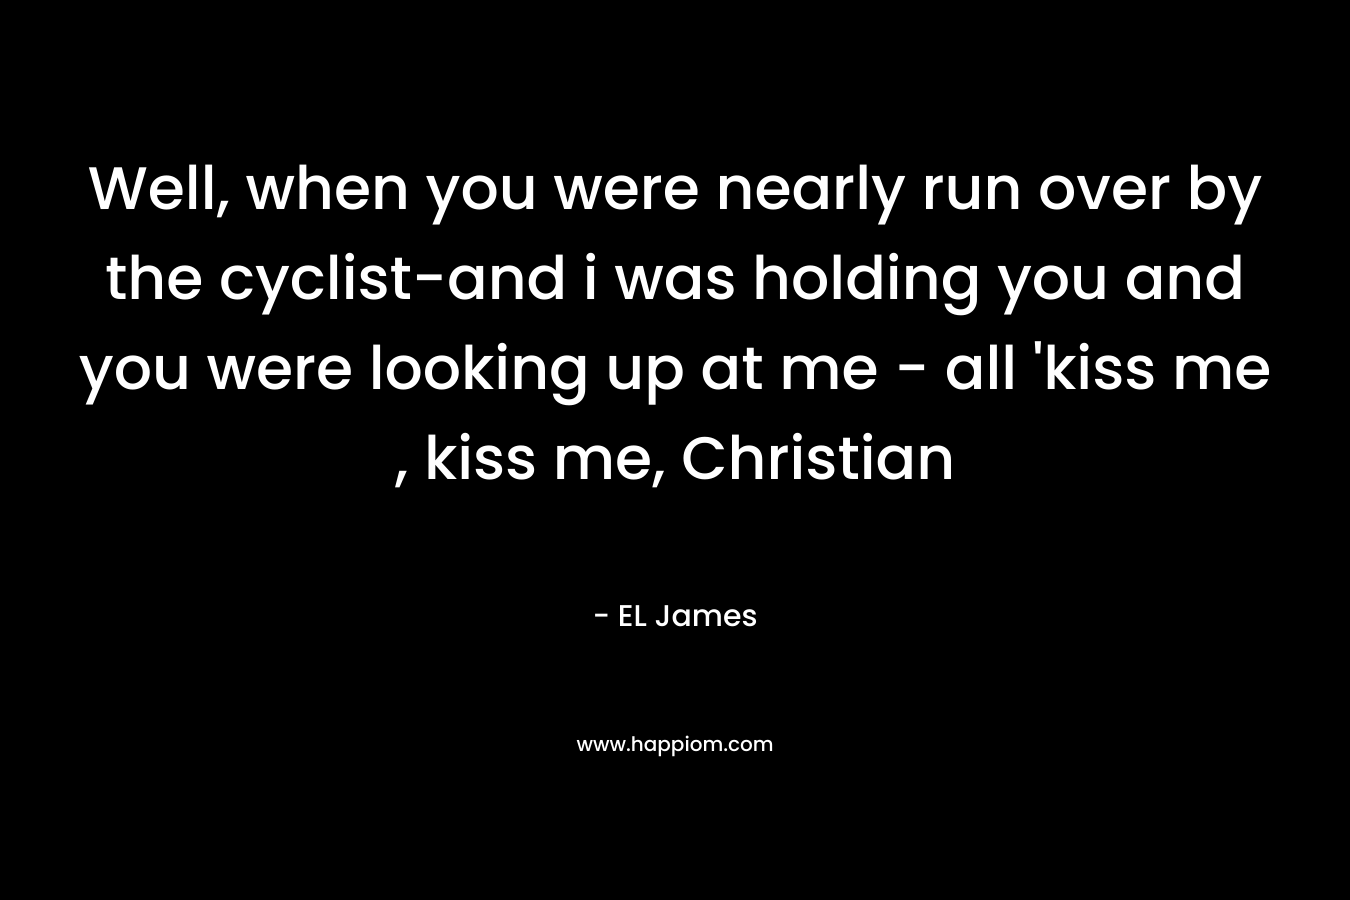 Well, when you were nearly run over by the cyclist-and i was holding you and you were looking up at me – all ‘kiss me , kiss me, Christian – EL James